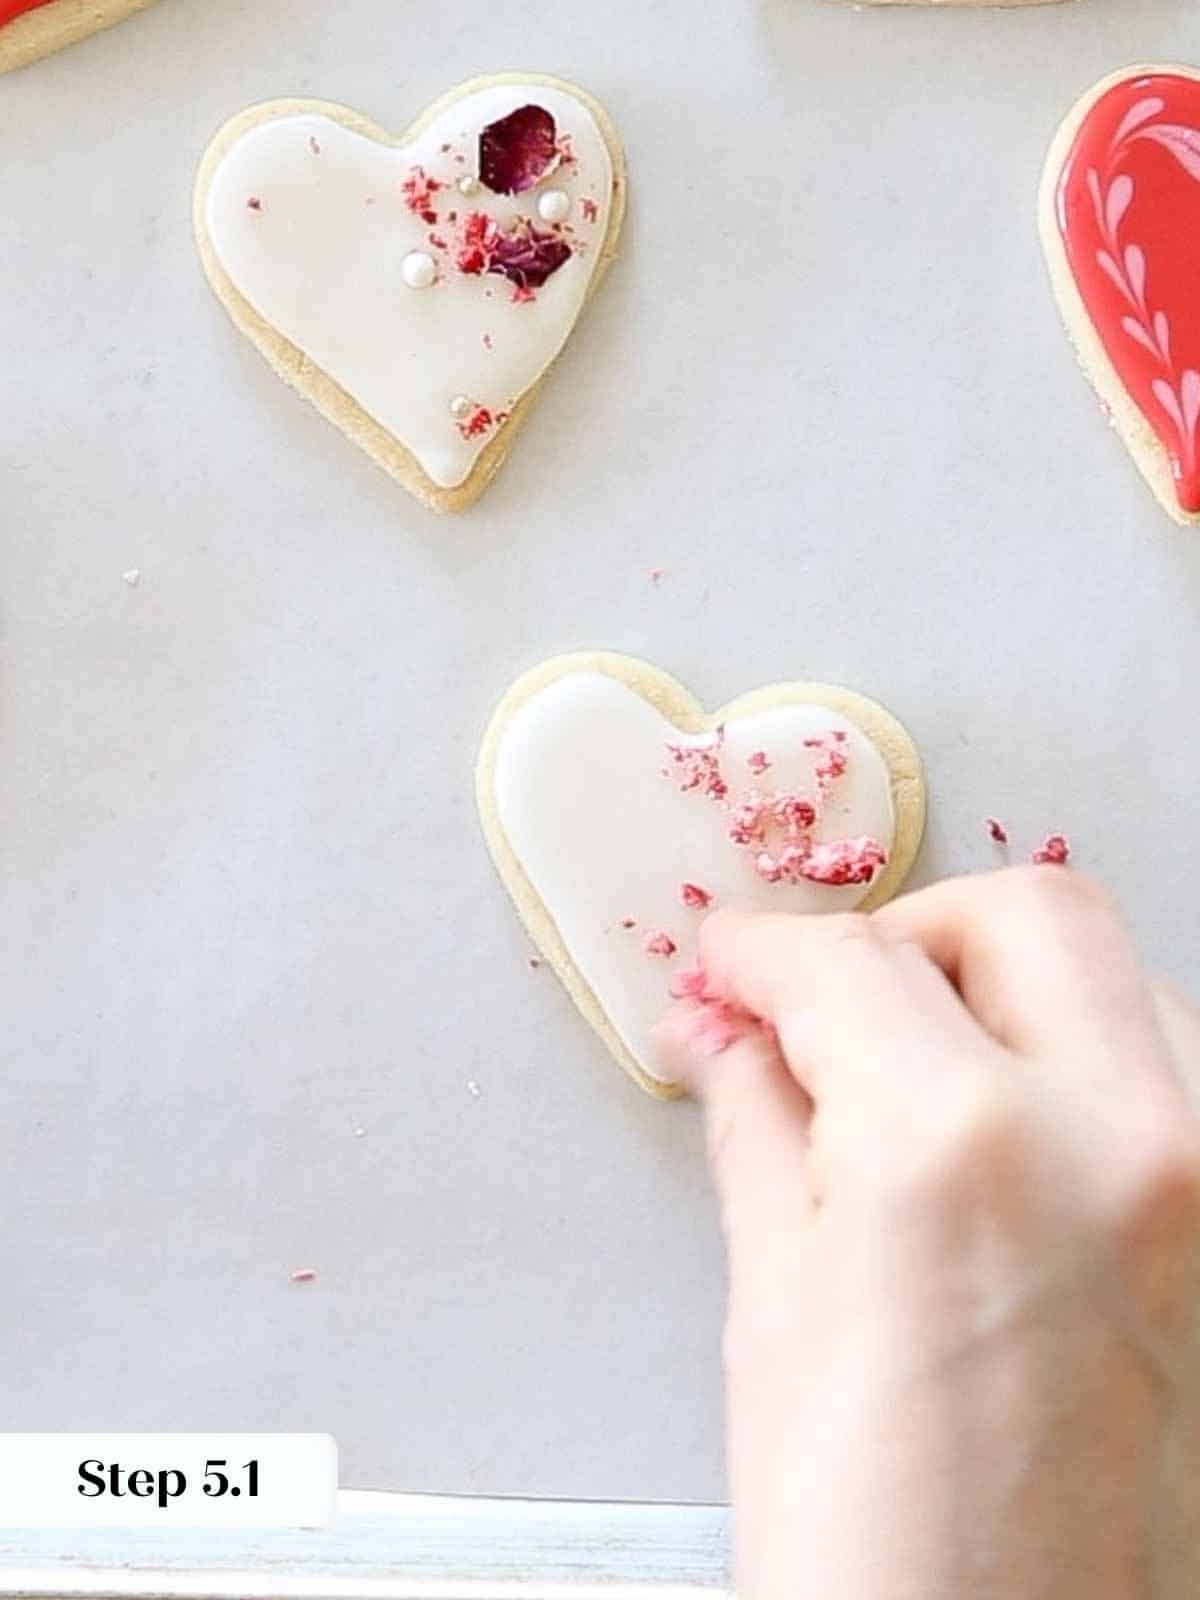 sprinkling dehydrated strawberries on white hearts.